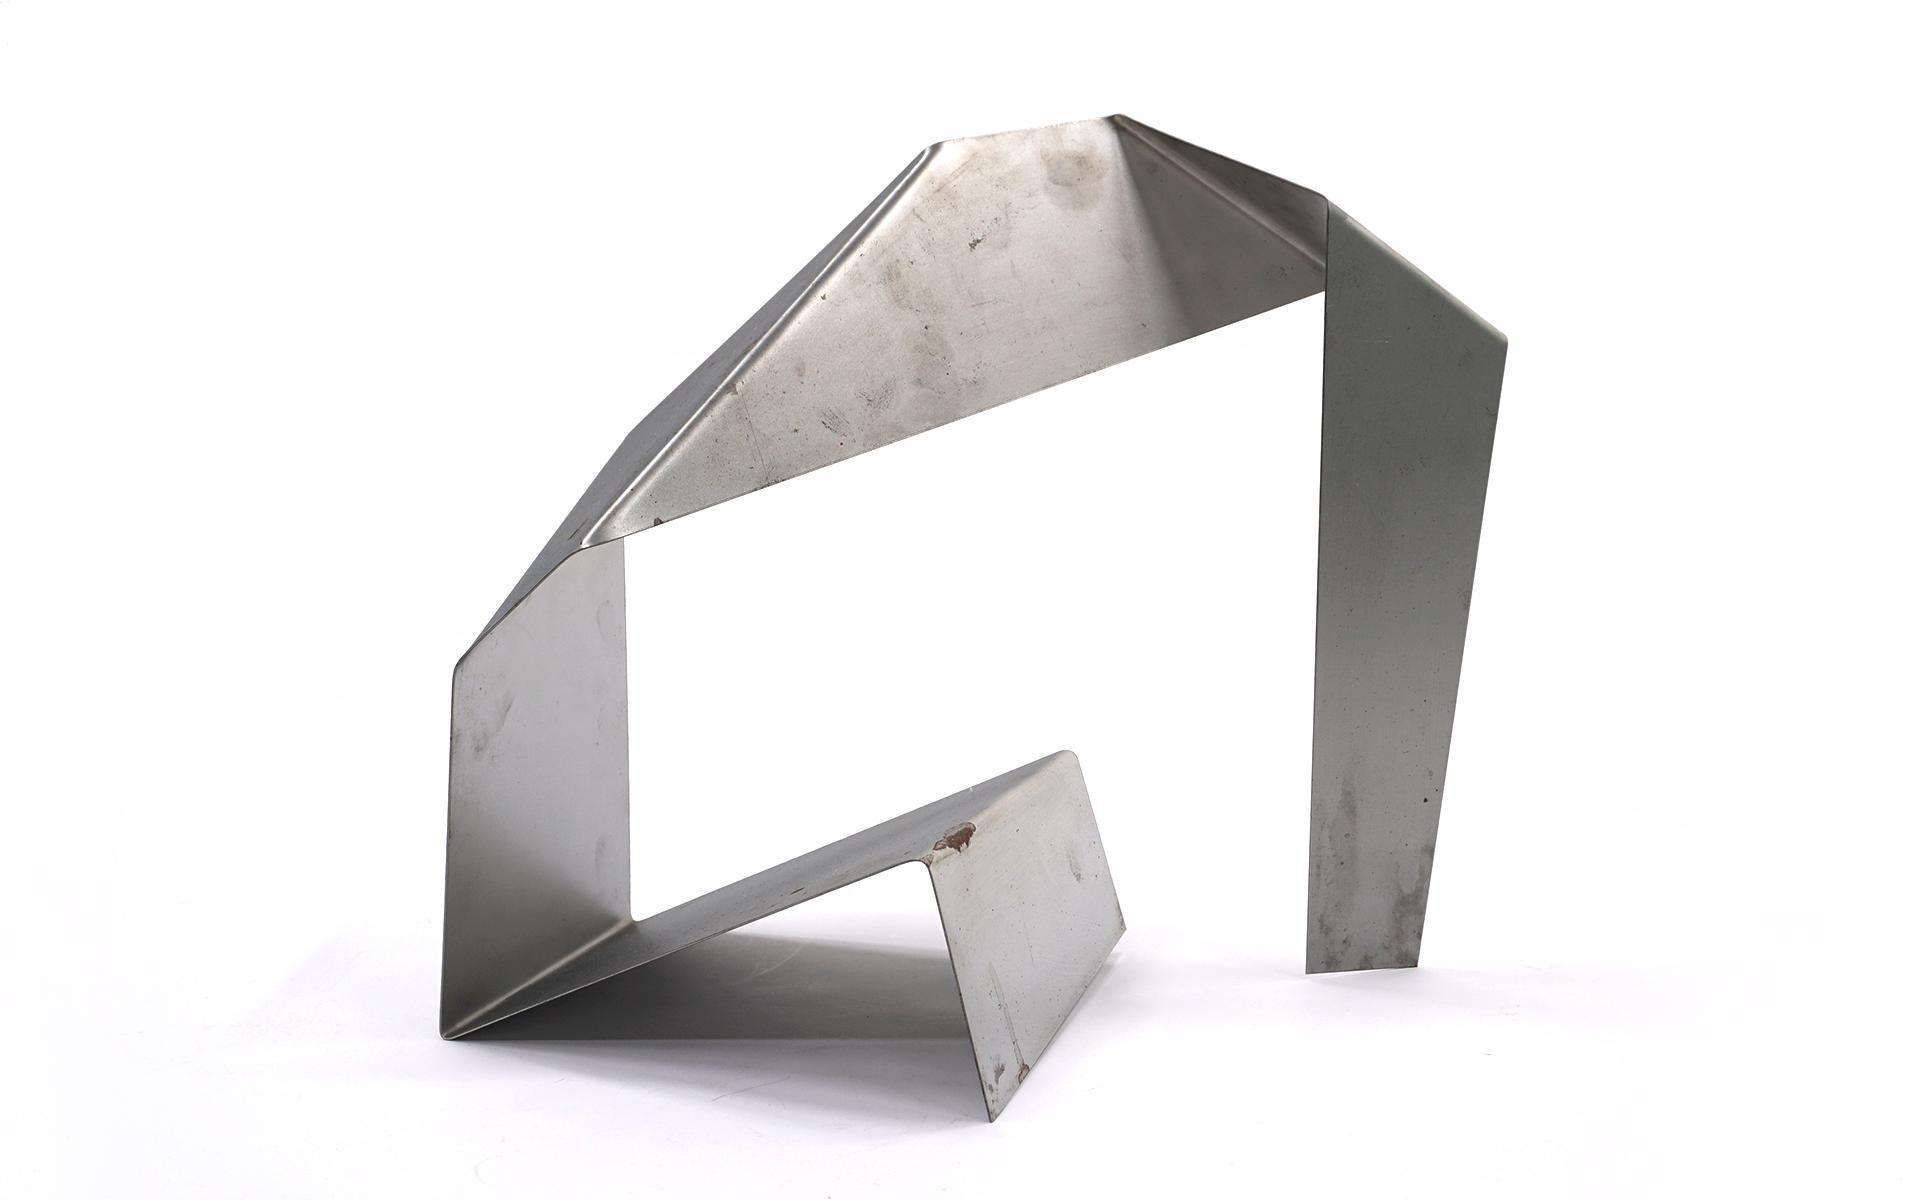 This is a model for a large sculpture made by artist James Bearden. A great table top sculpture in it's own right. Hand signed by the artist. Made of bent and angled metal with a silver finish. Free shipping in the continental US.